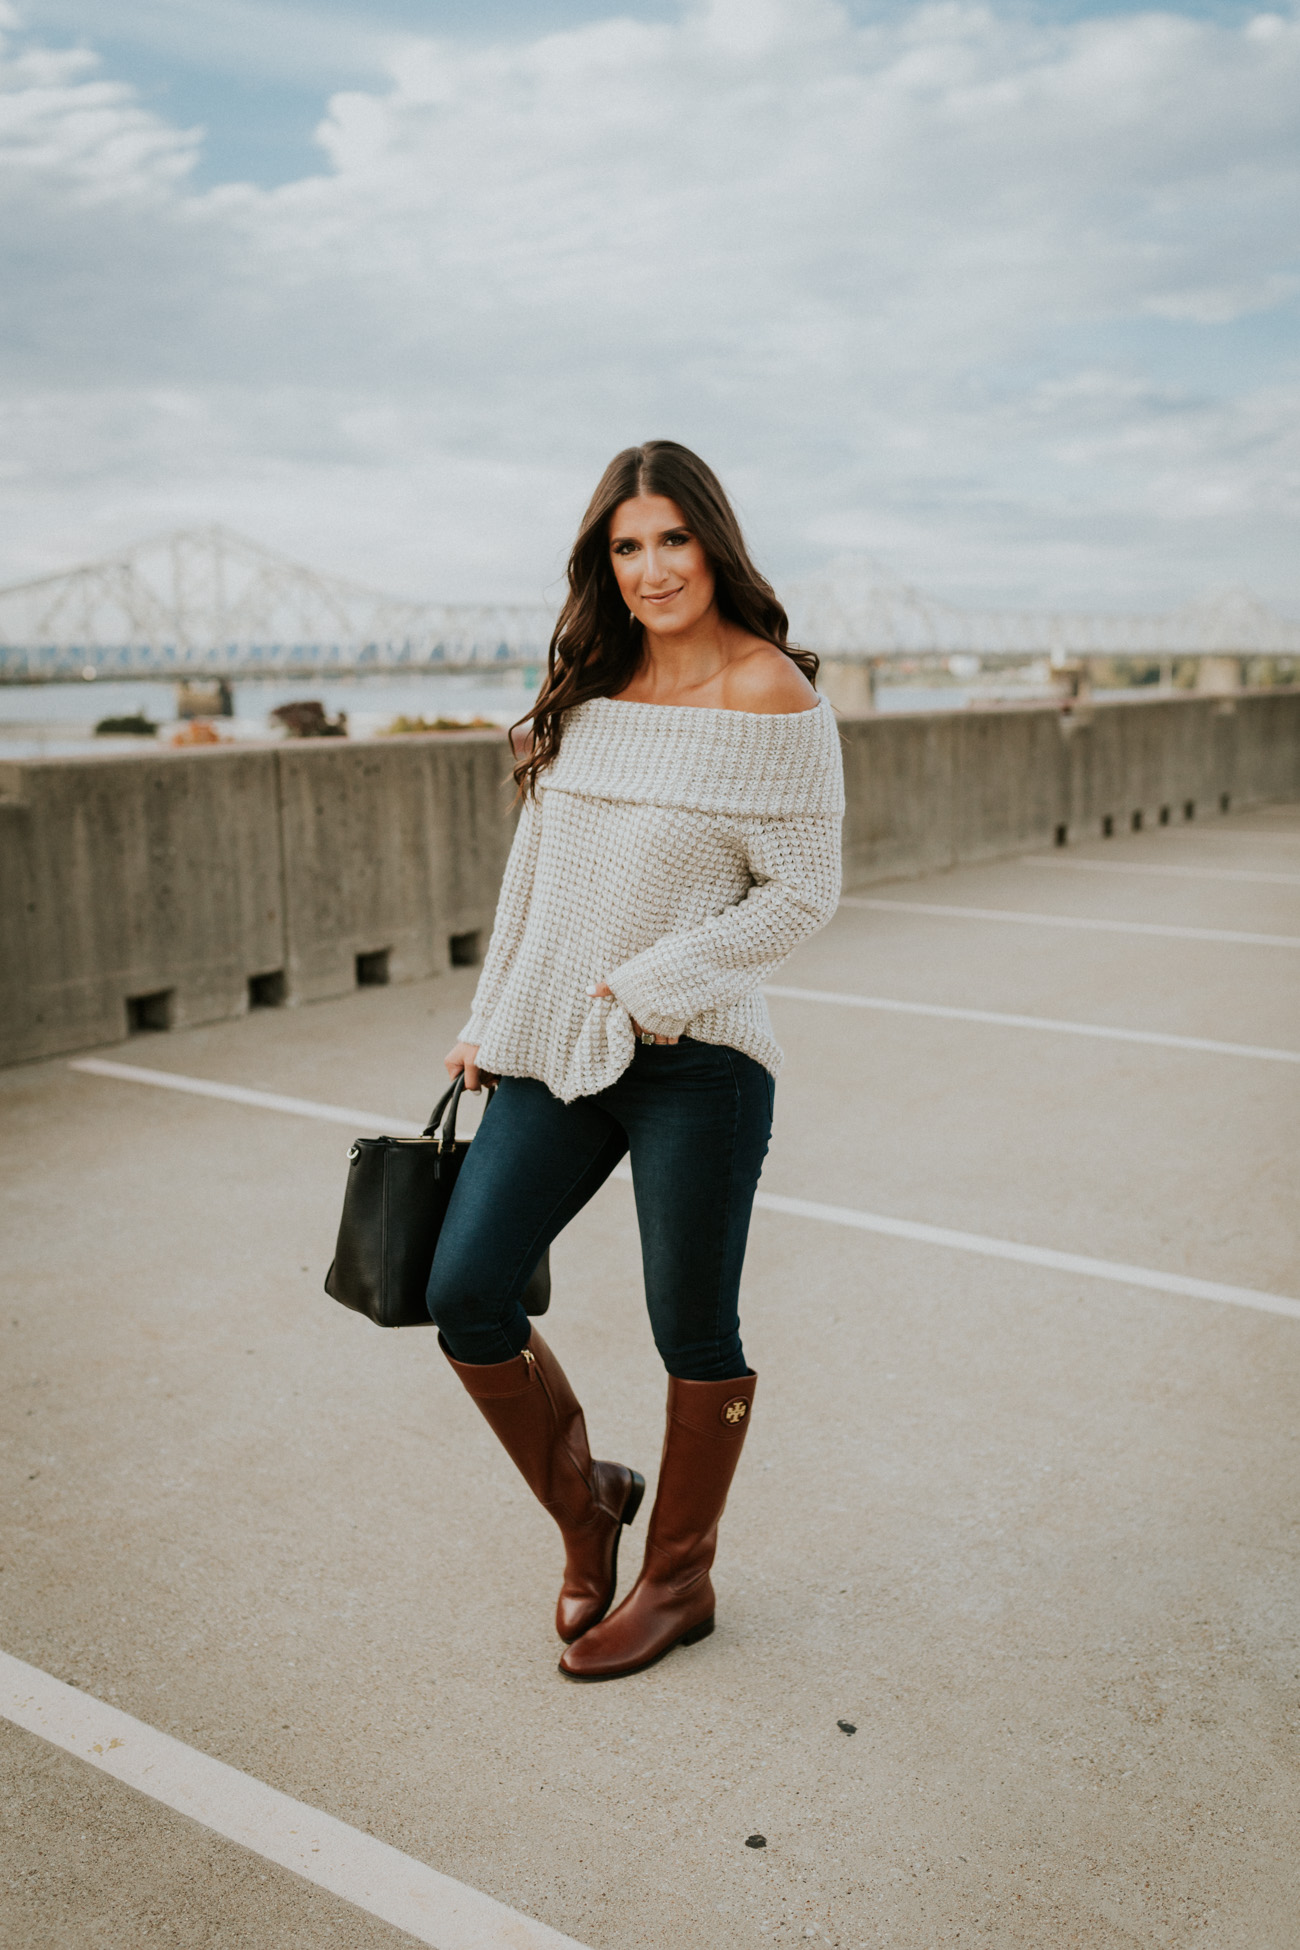 Fall Riding Boots | A Southern Drawl